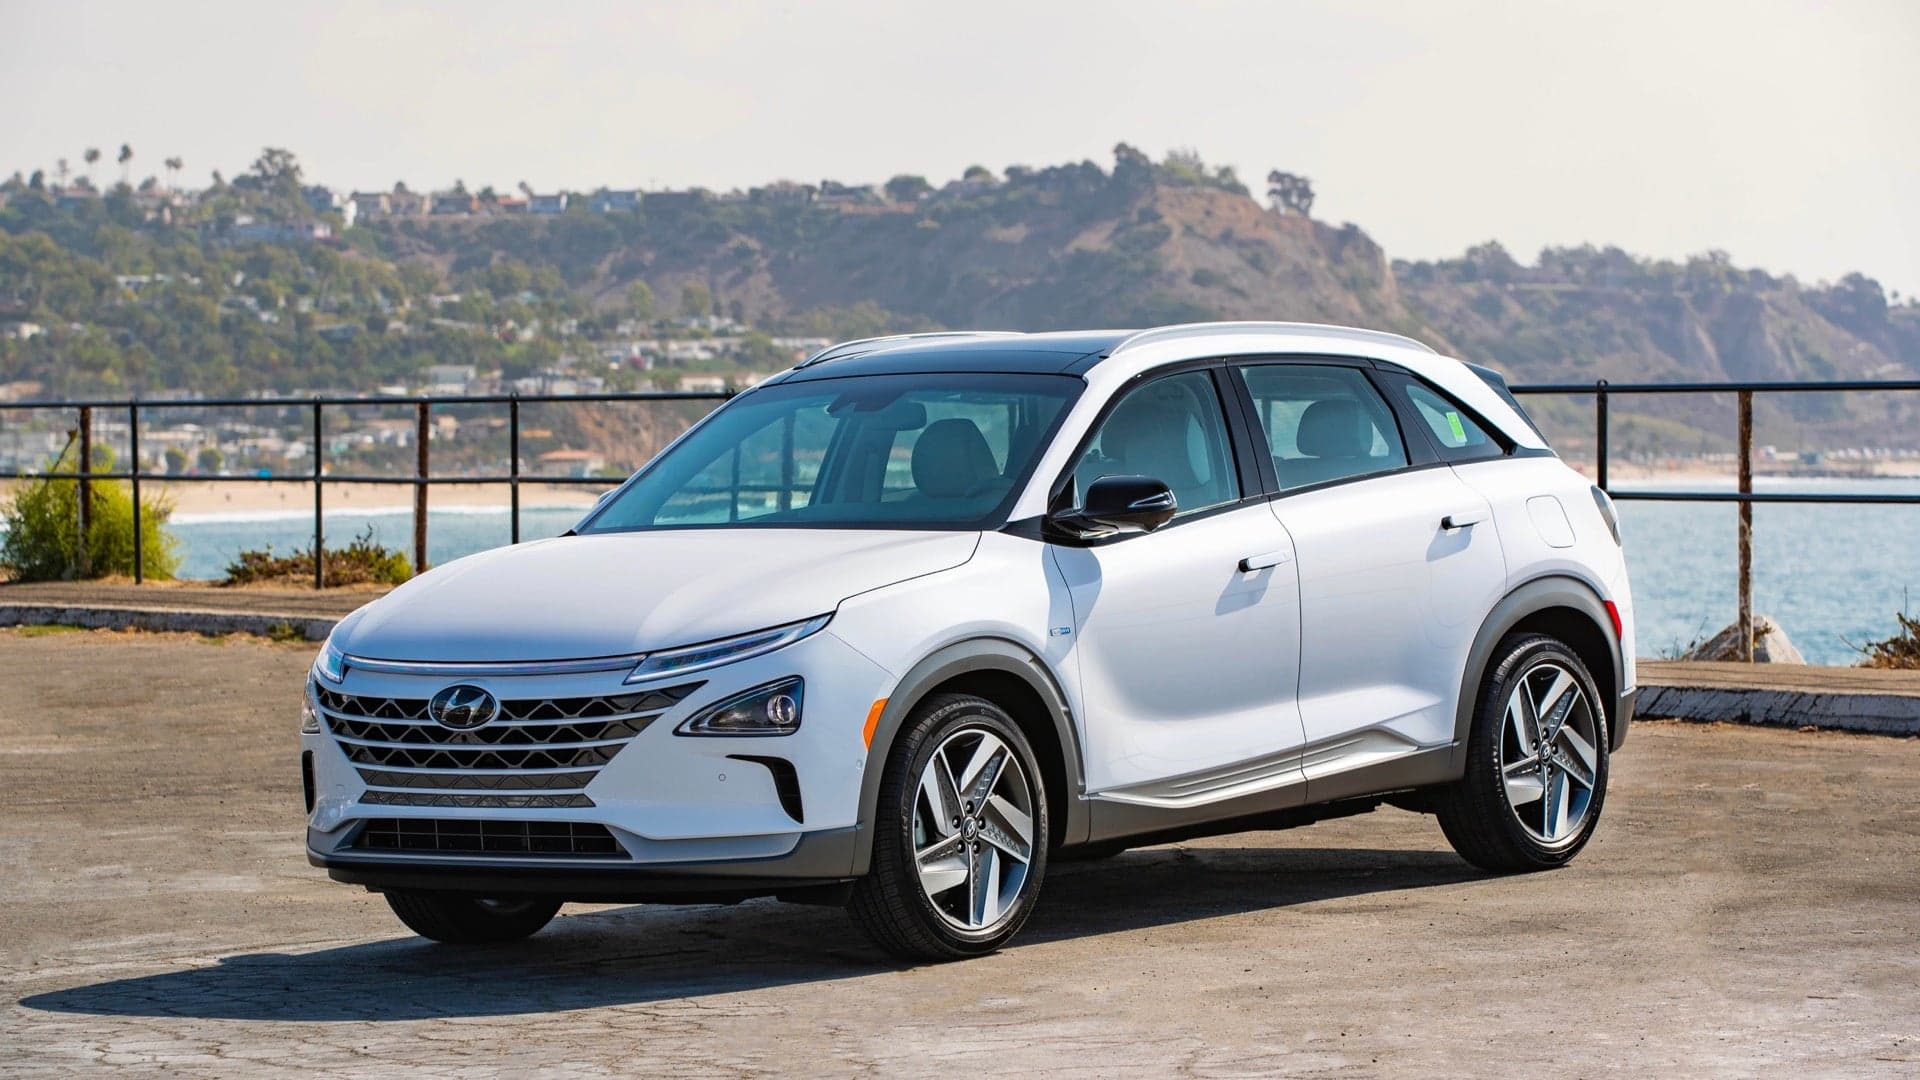 Hyundai Nexo Hydrogen Fuel-Cell SUV Will Go on Sale by End of Year